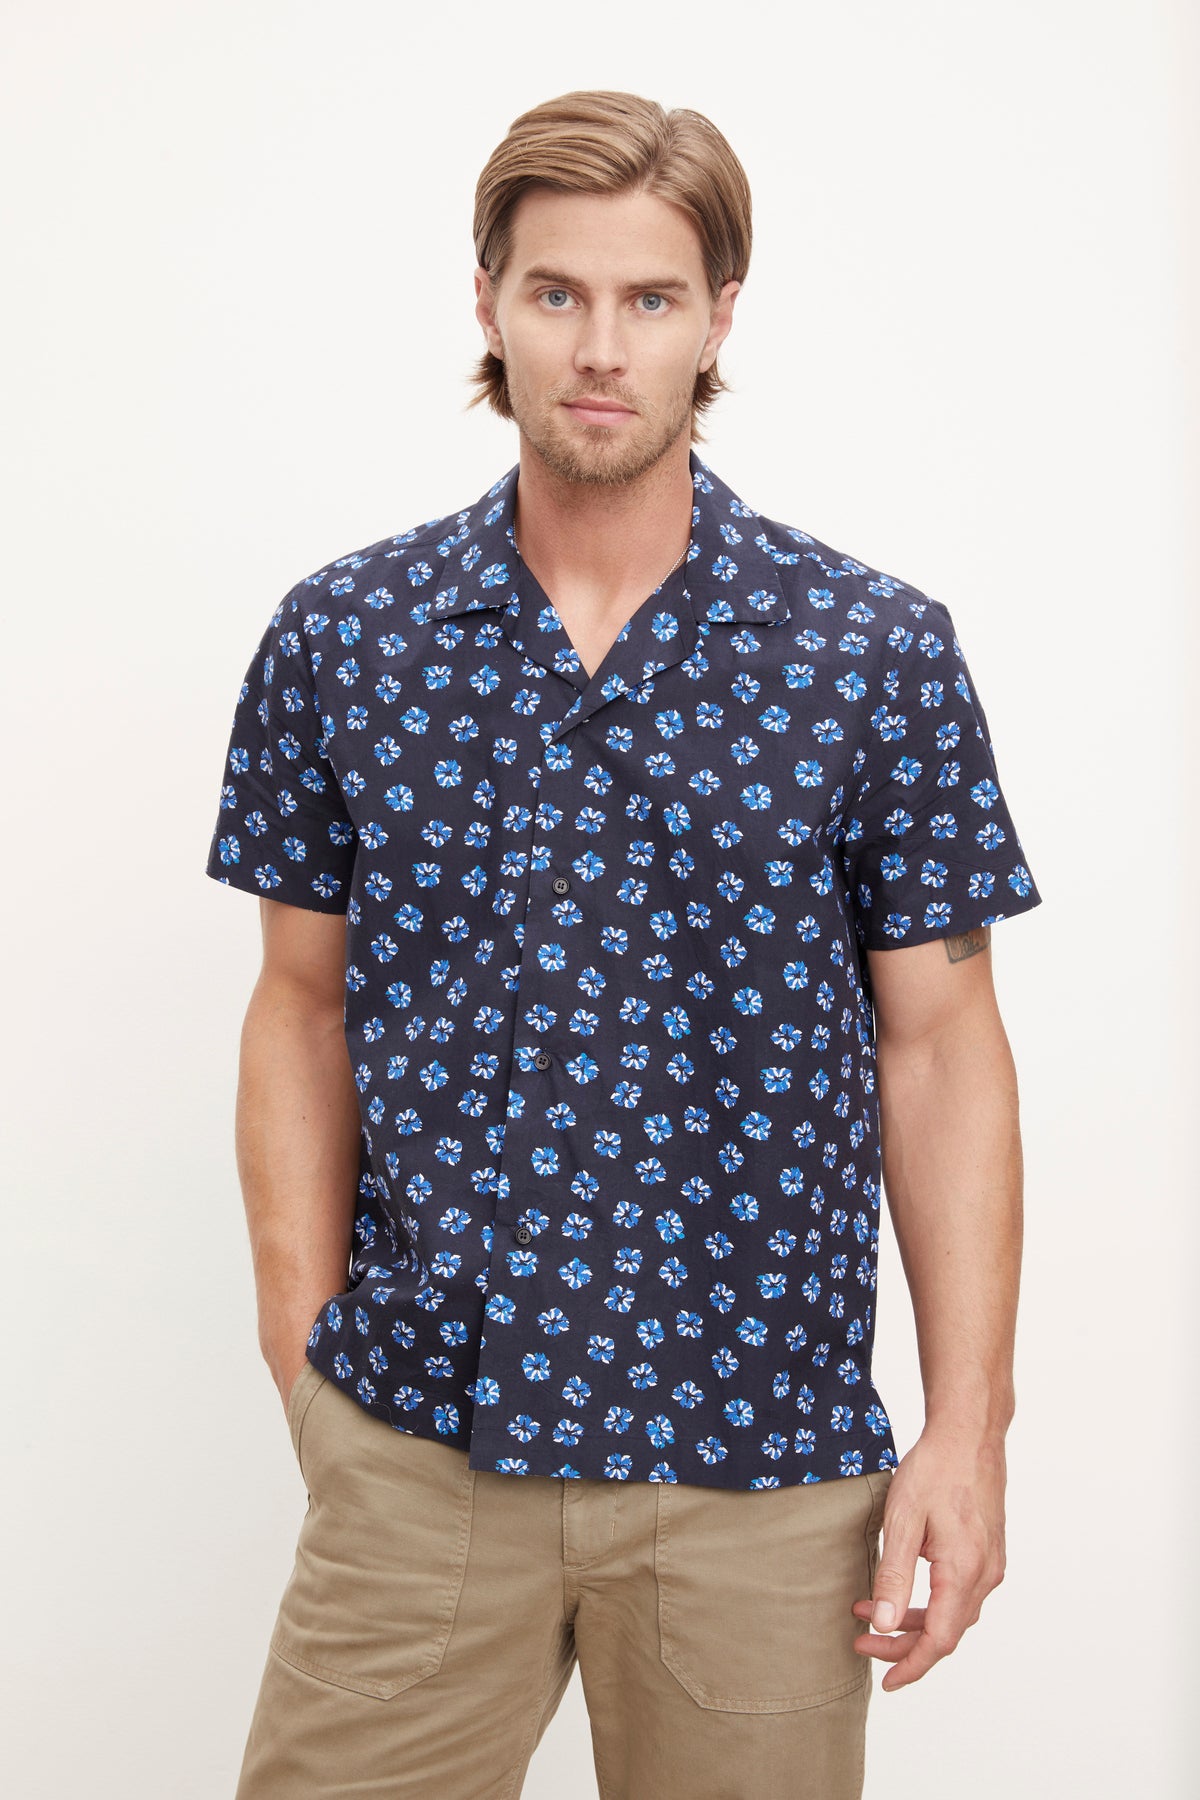   Man wearing a short-sleeved patterned Iggy button-up shirt by Velvet by Graham & Spencer and khaki pants standing against a plain background. 